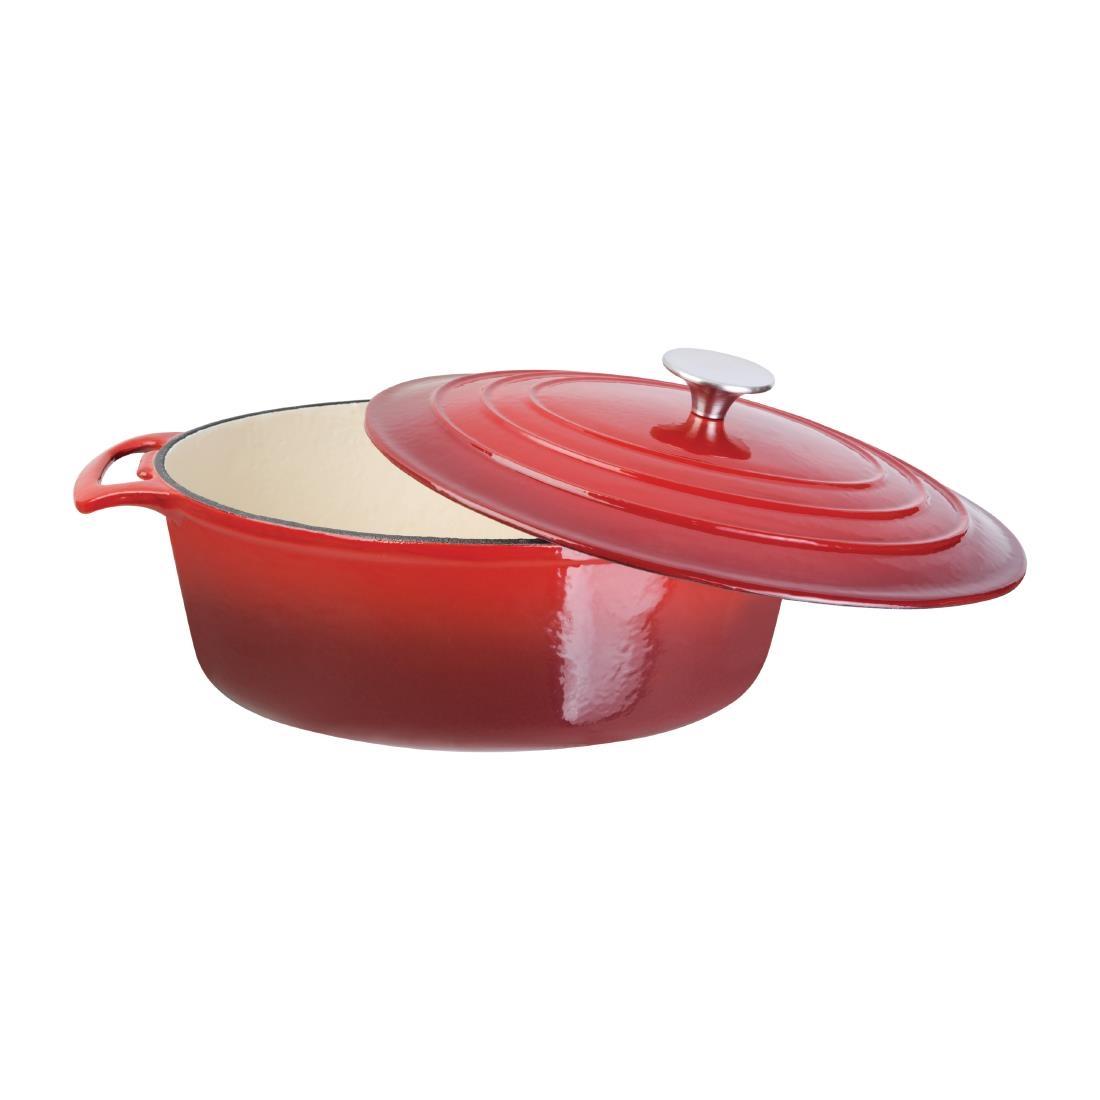 Vogue Red Oval Casserole Dish 6Ltr - GH314  - 3